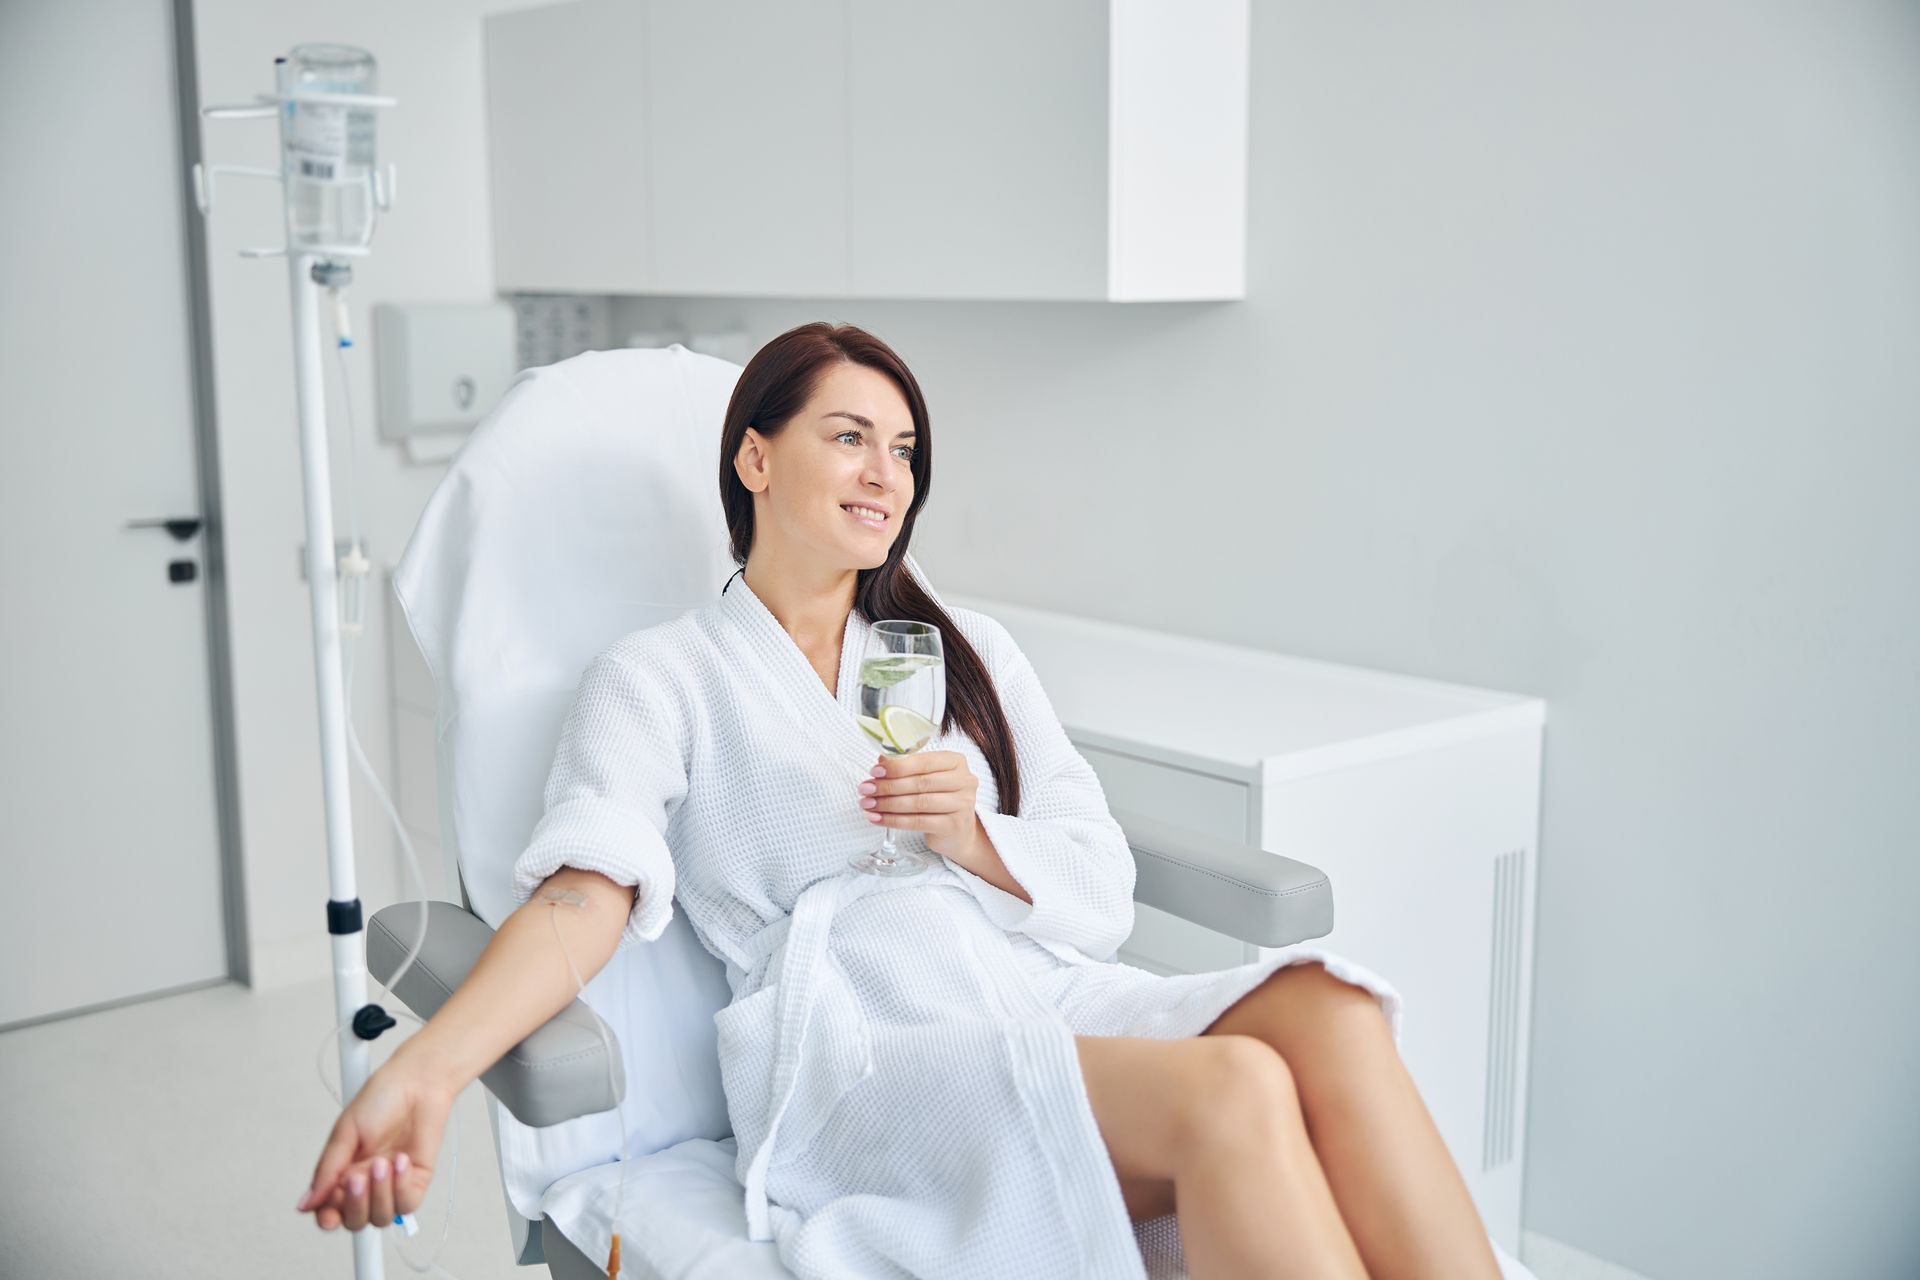 a woman is sitting in a hospital bed holding a glass of wine